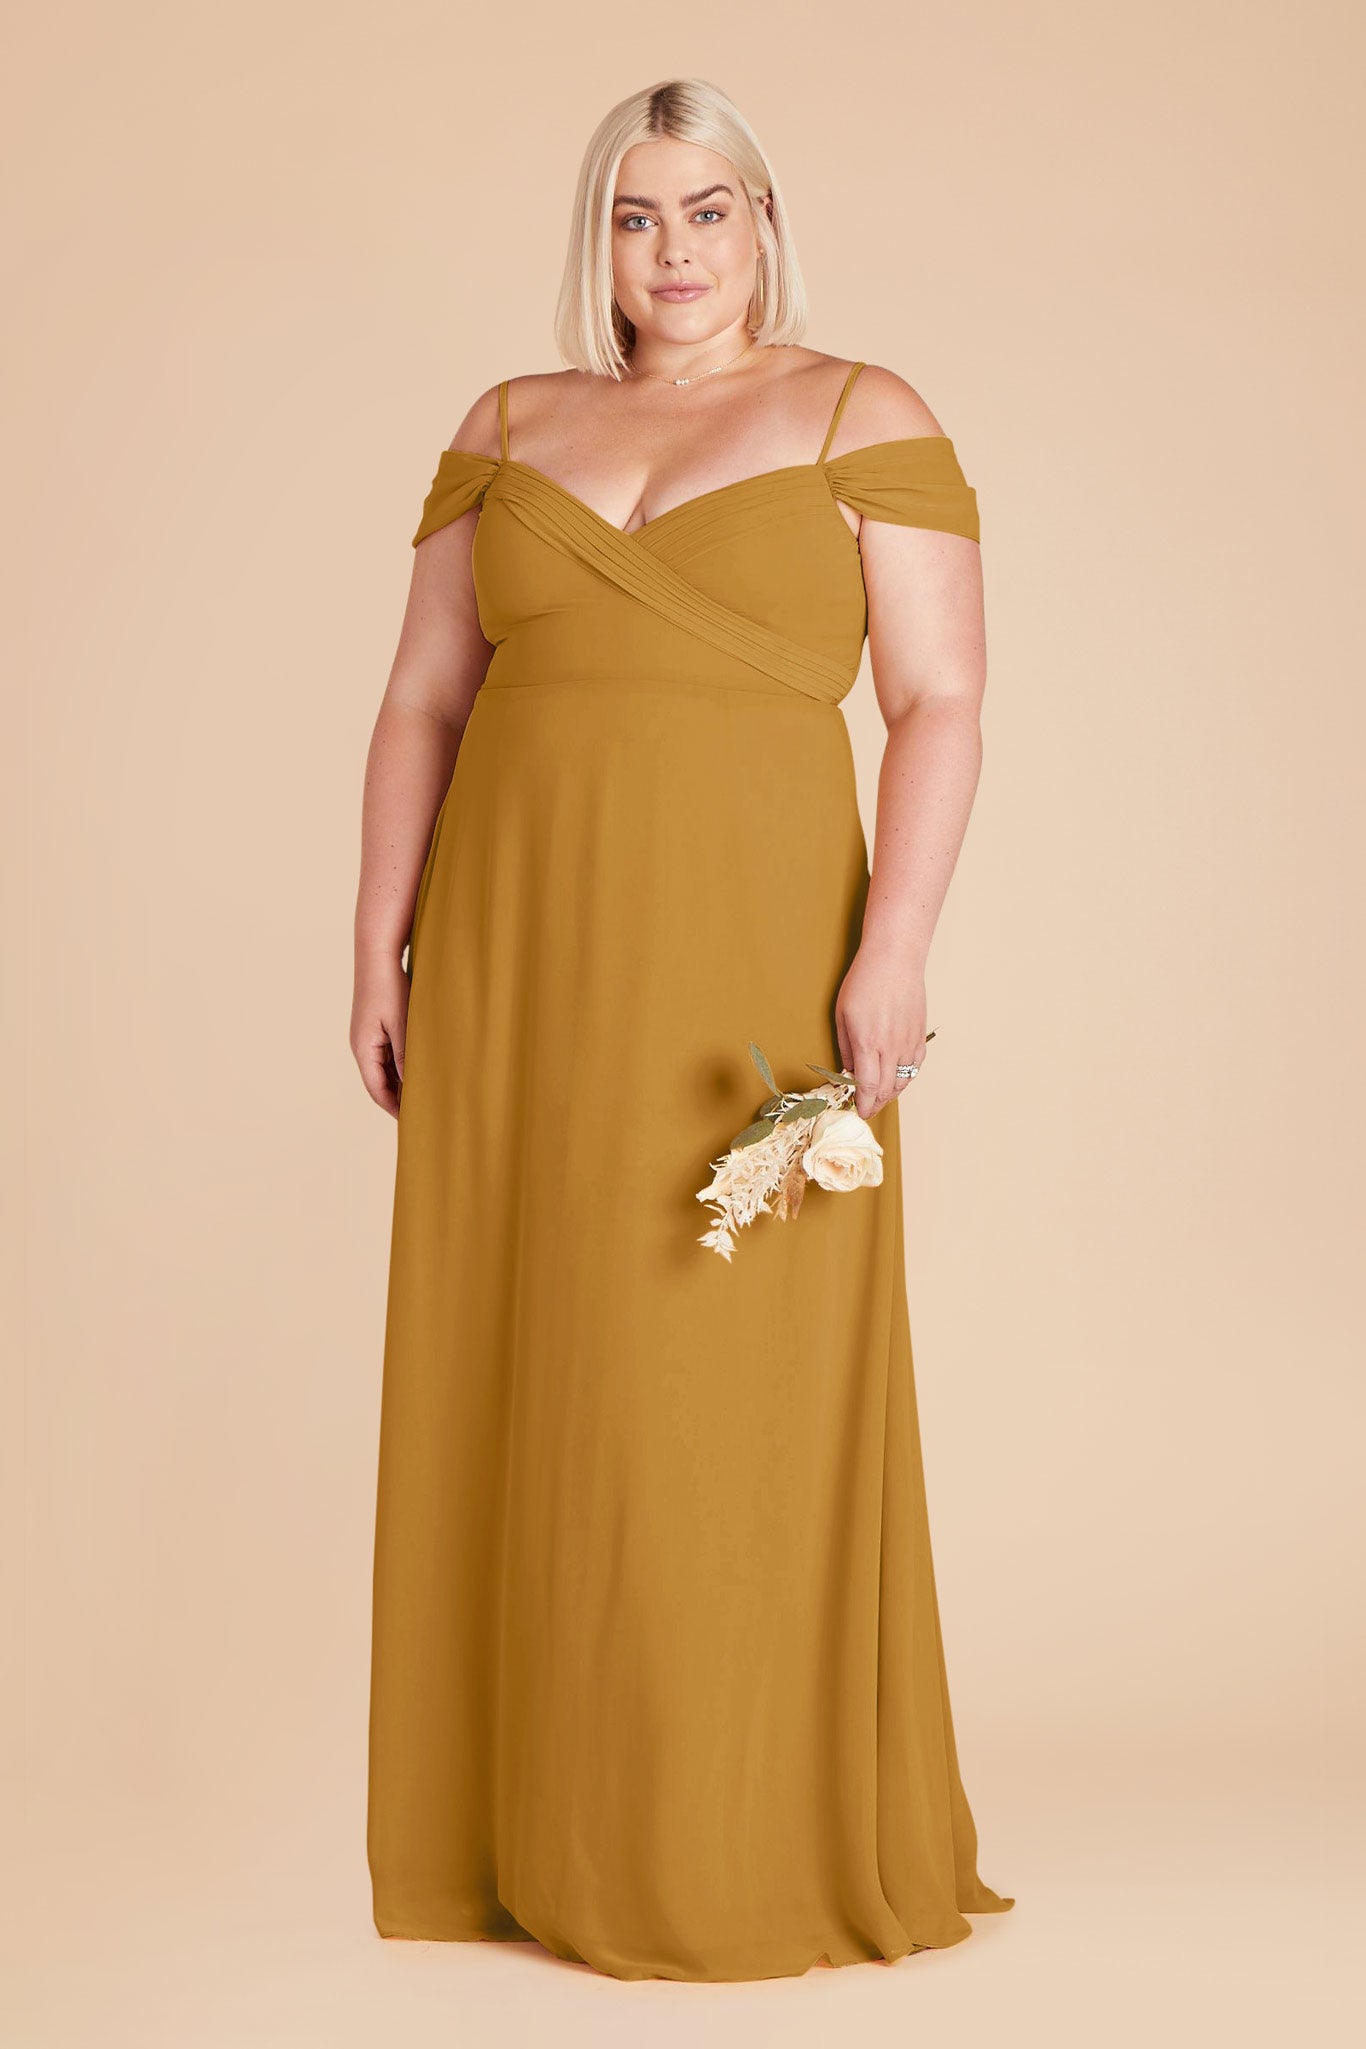 Marigold Spence Convertible Dress by Birdy Grey